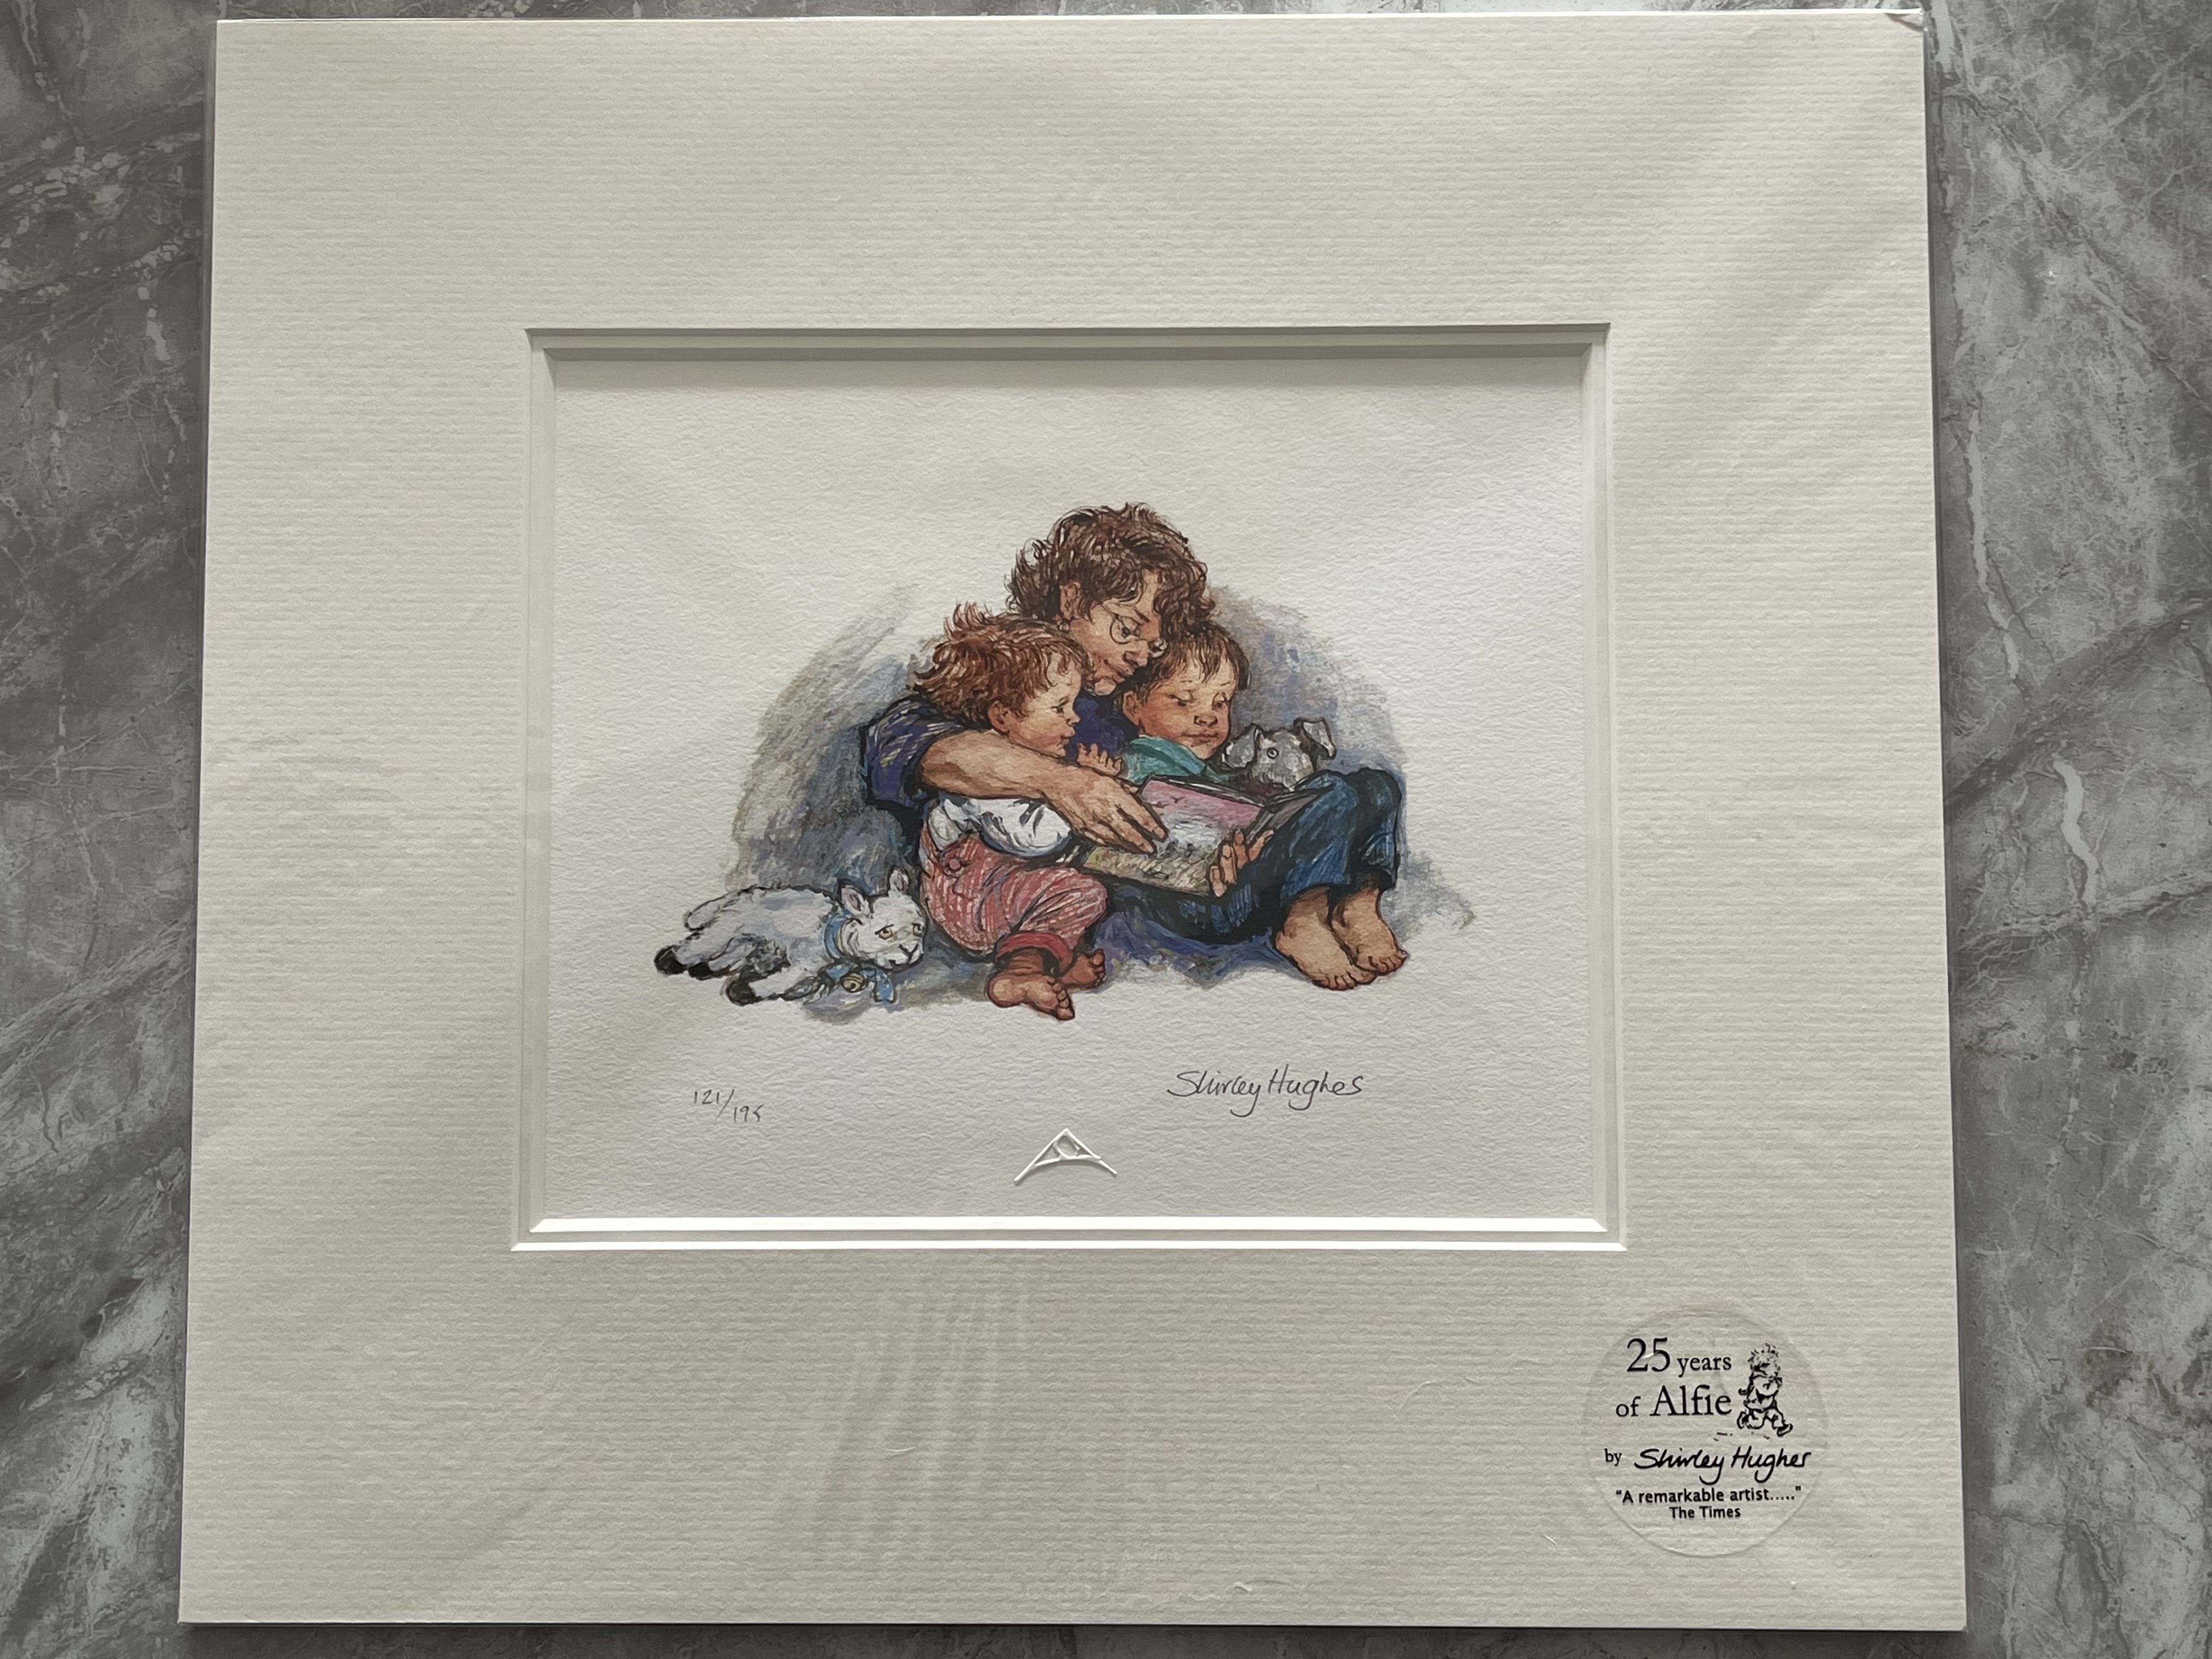 Fourteen Signed Giclée Prints by Shirley Hughes - - Image 12 of 51